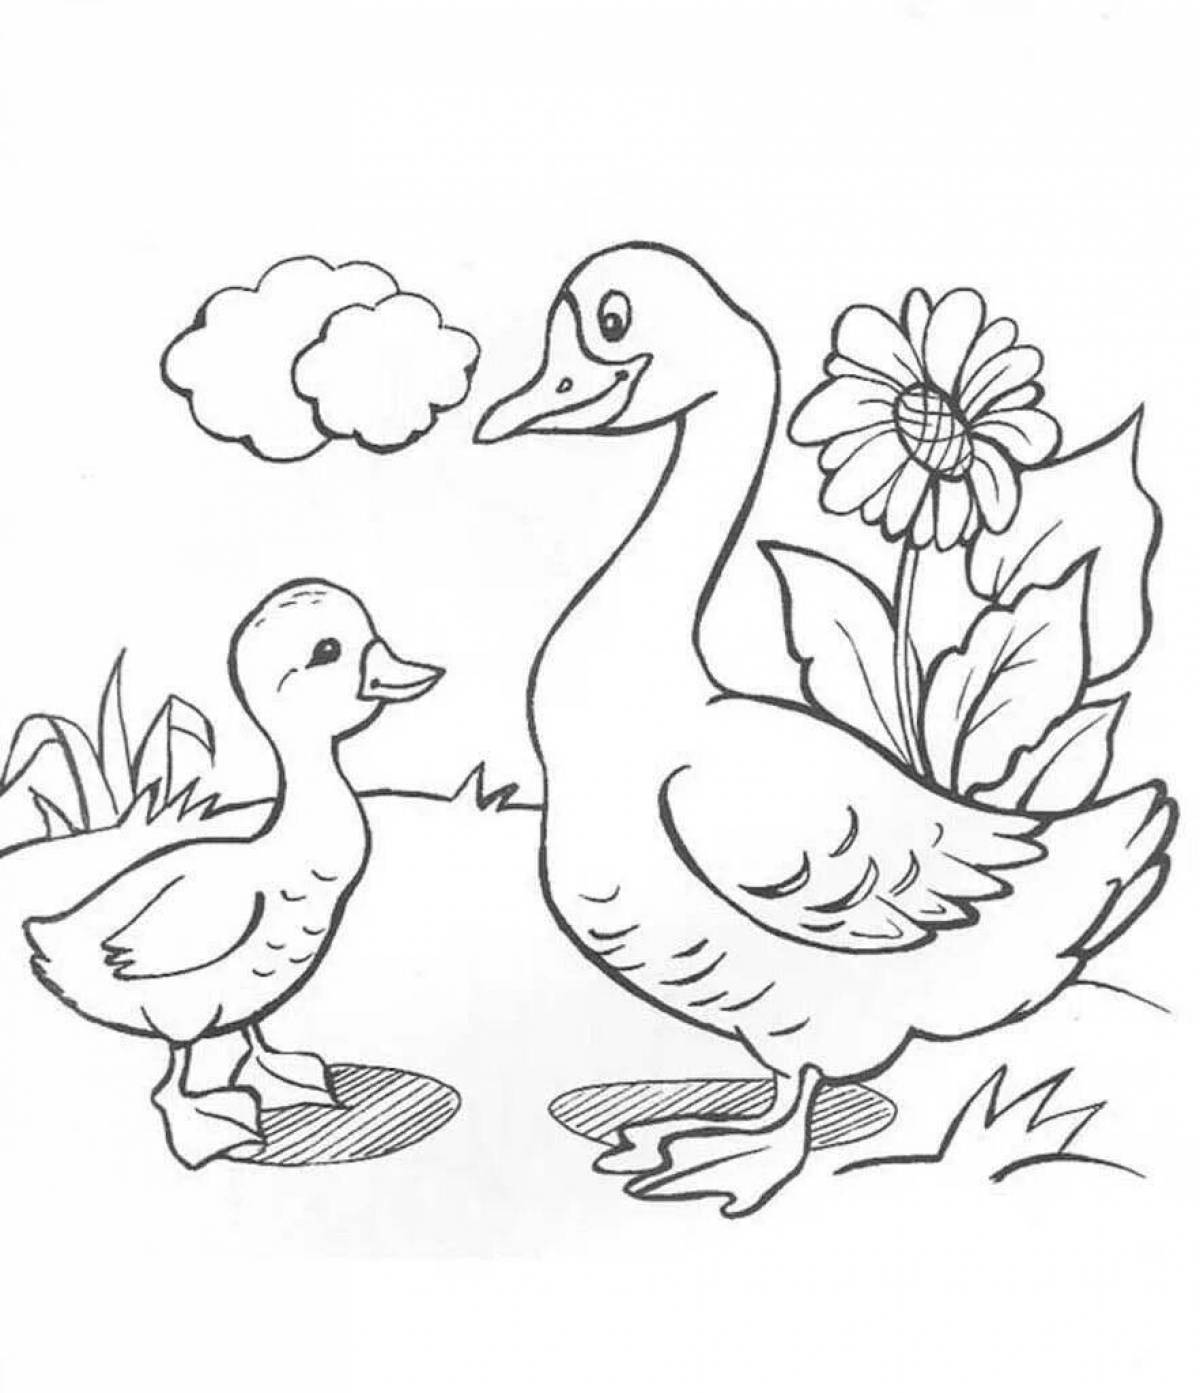 Colouring happy geese